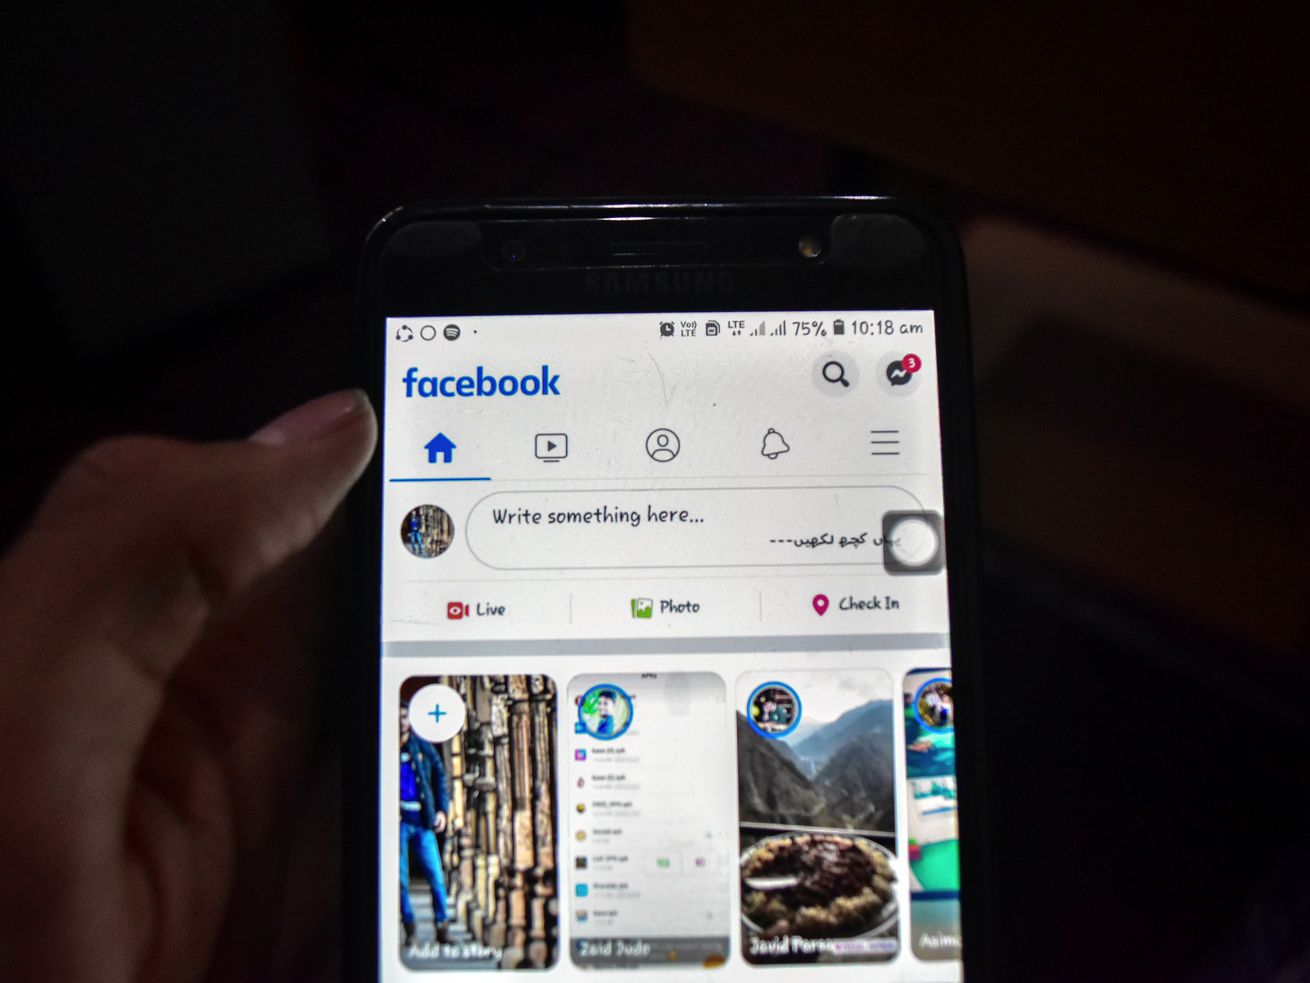 Facebook page displayed on a phone.